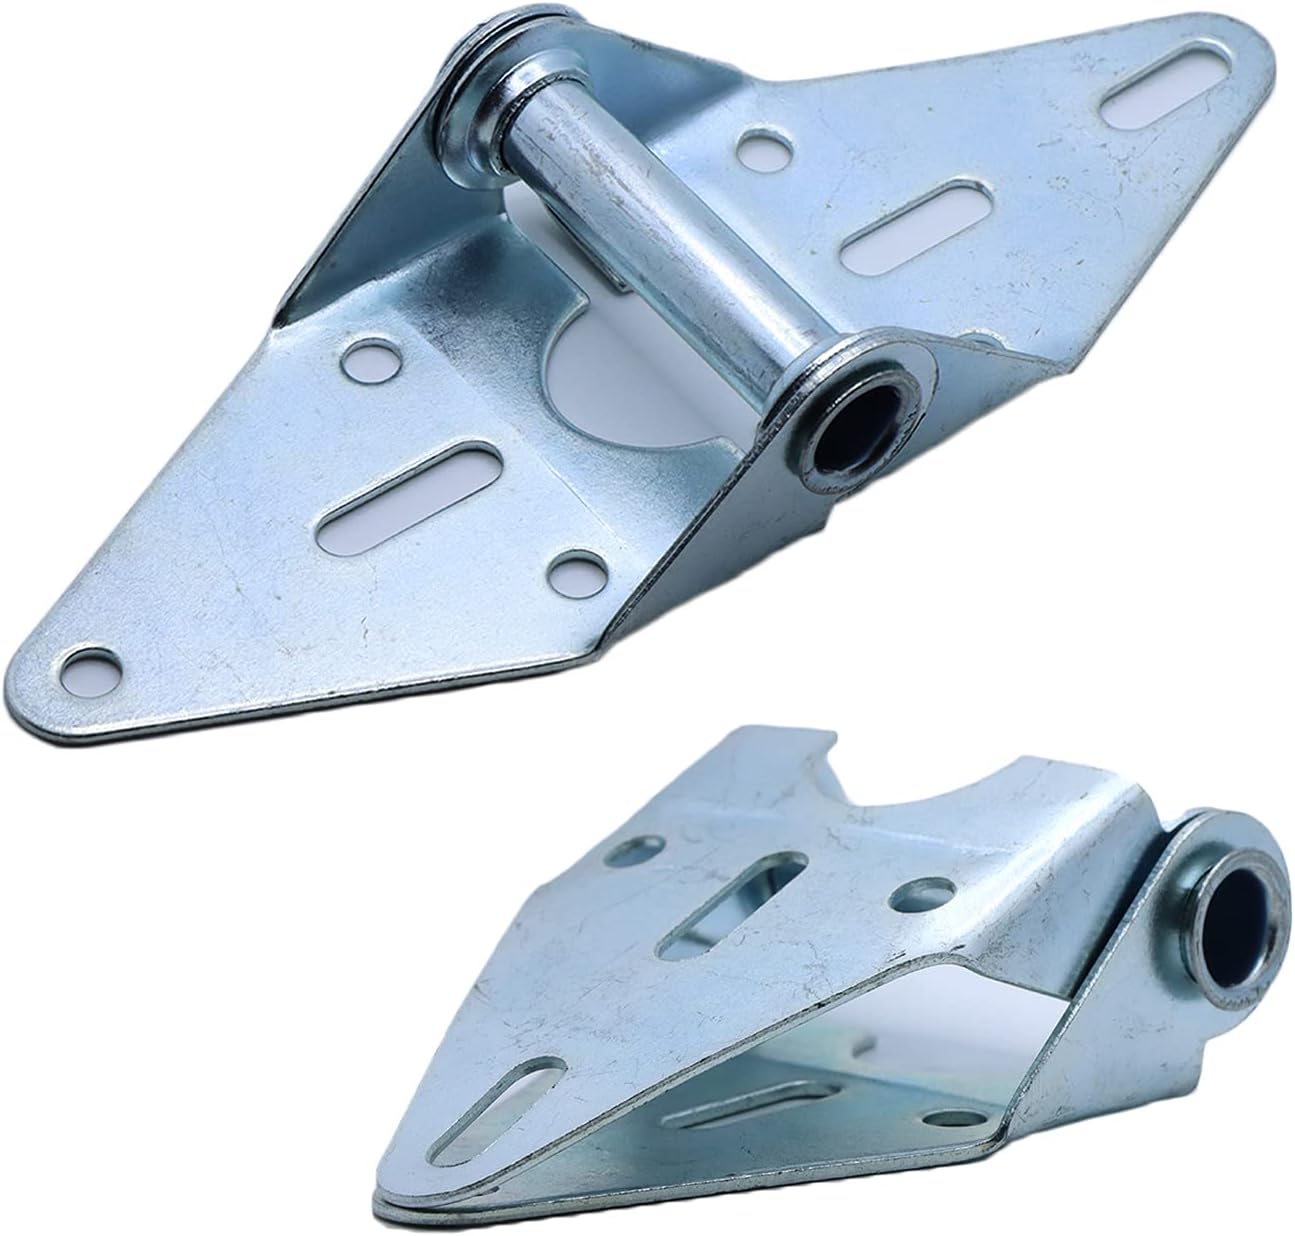 Wulankd 2 Packs Garage Door Hinges #1 with Galvanized Finish - Heavy Duty 14 Gauge Steel, Suitable for Residential/Light Commercial Gar